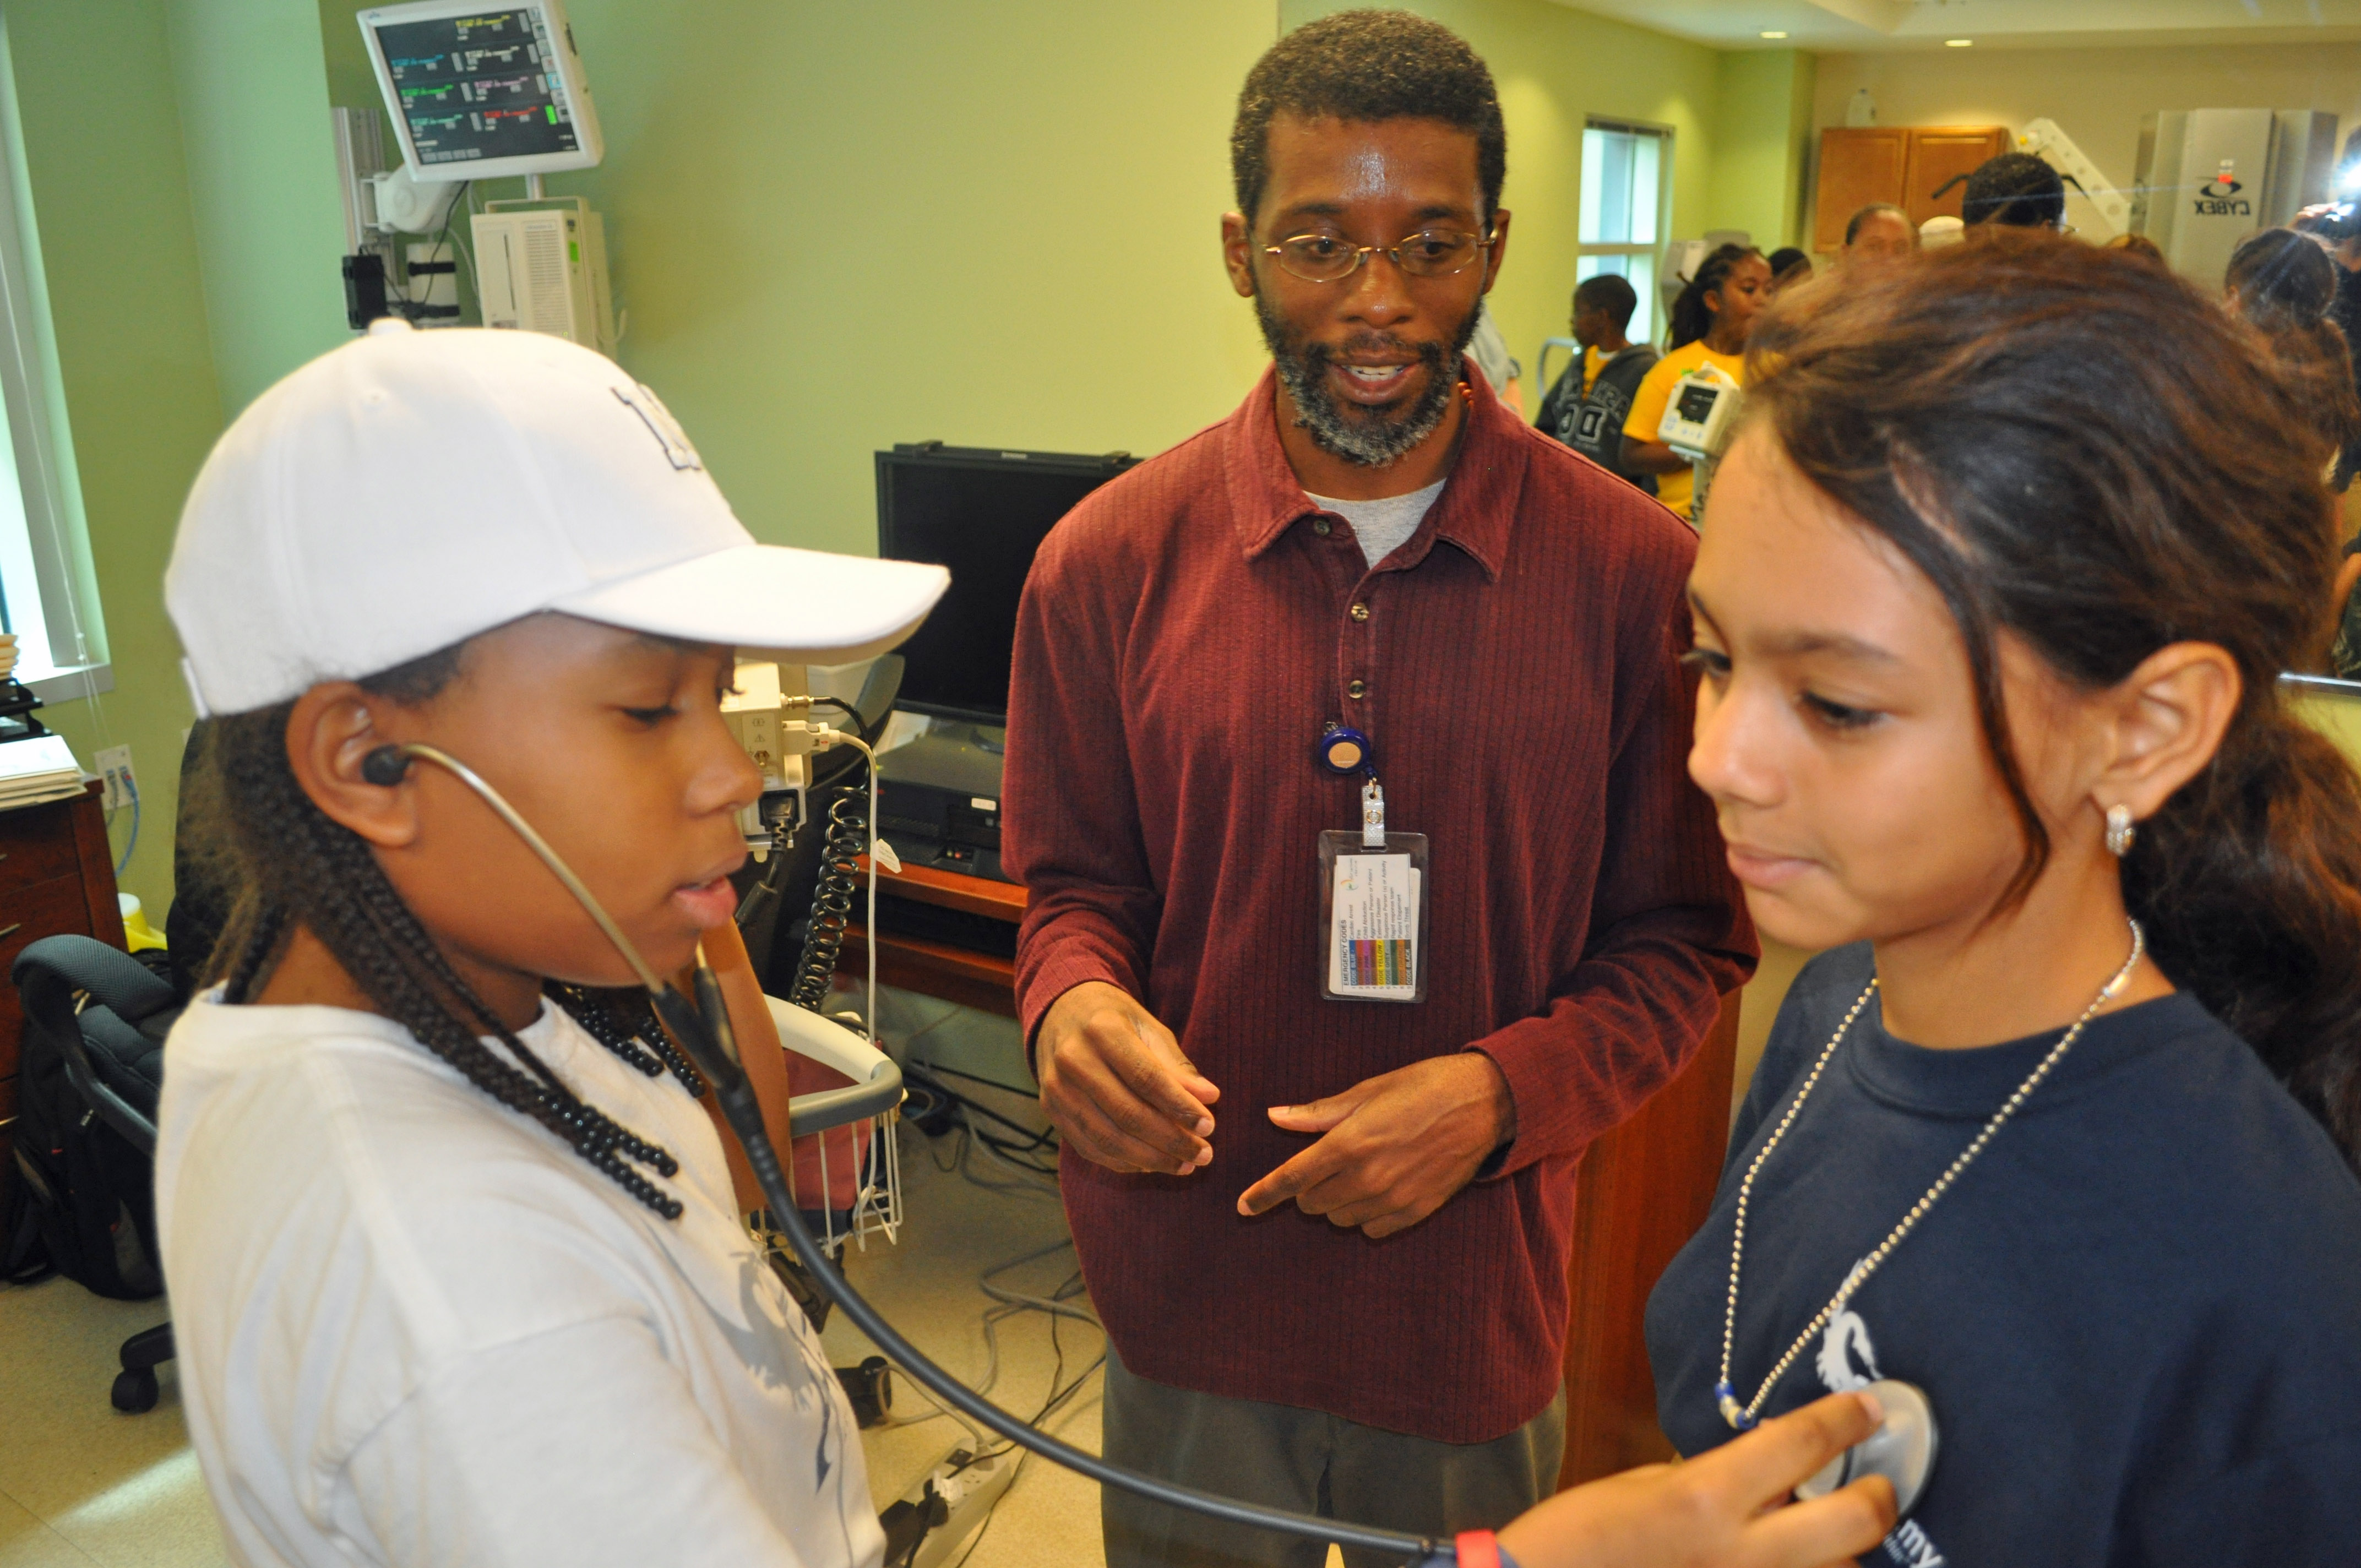 Exercise physiologist Andrew Edwards (center) shows Jesus Felix (left) how to use a stethoscope on fellow 6th grader Cayla Felix.